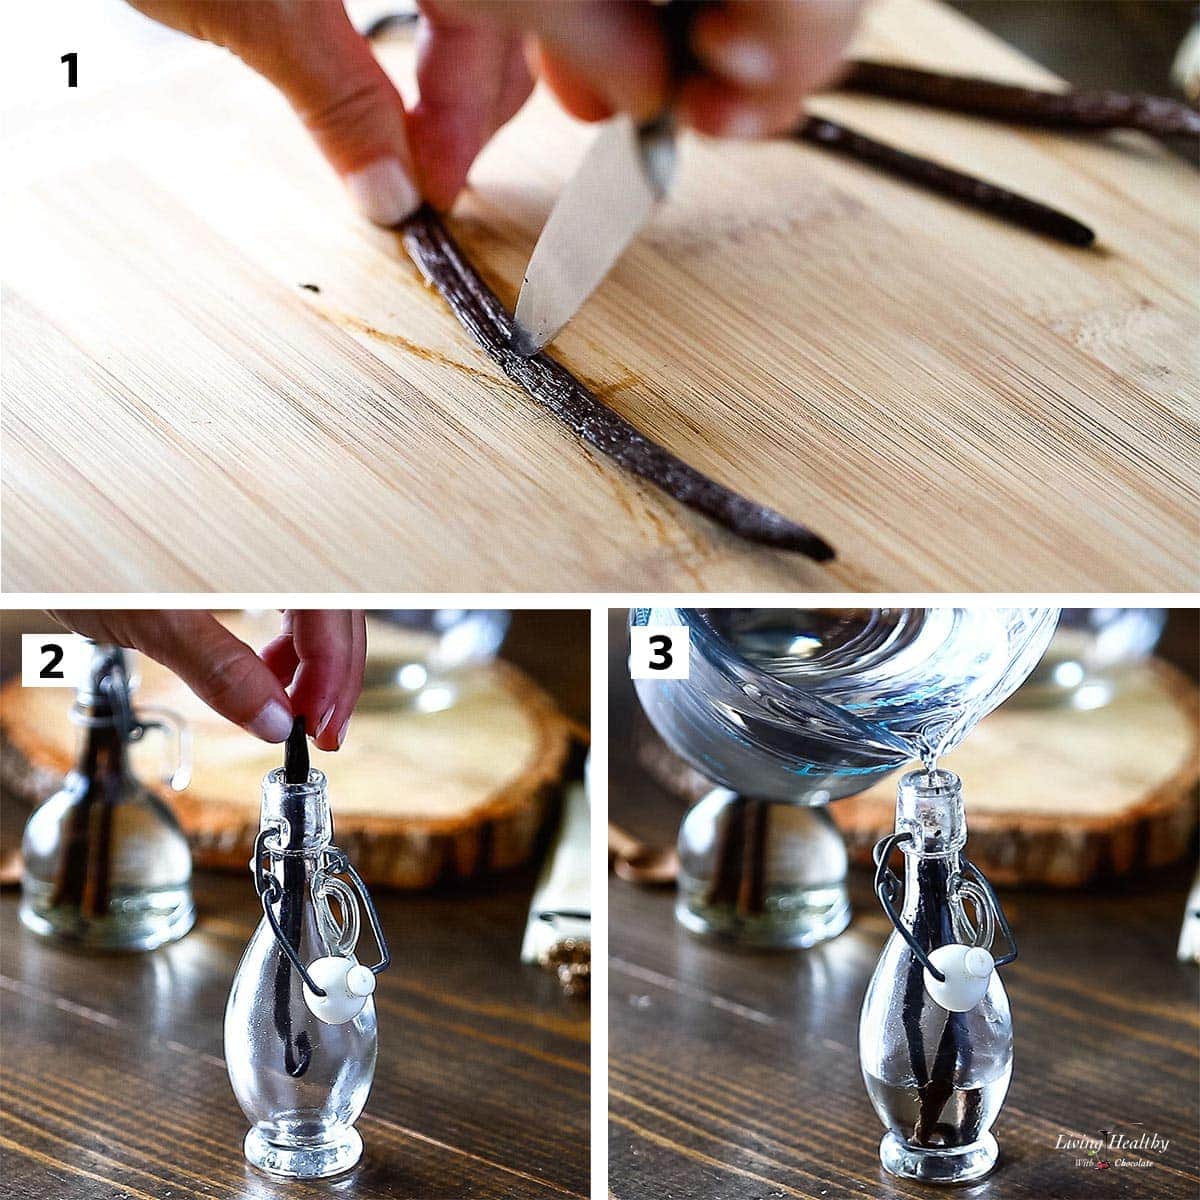 3 steps collage showing how to make vanilla extract